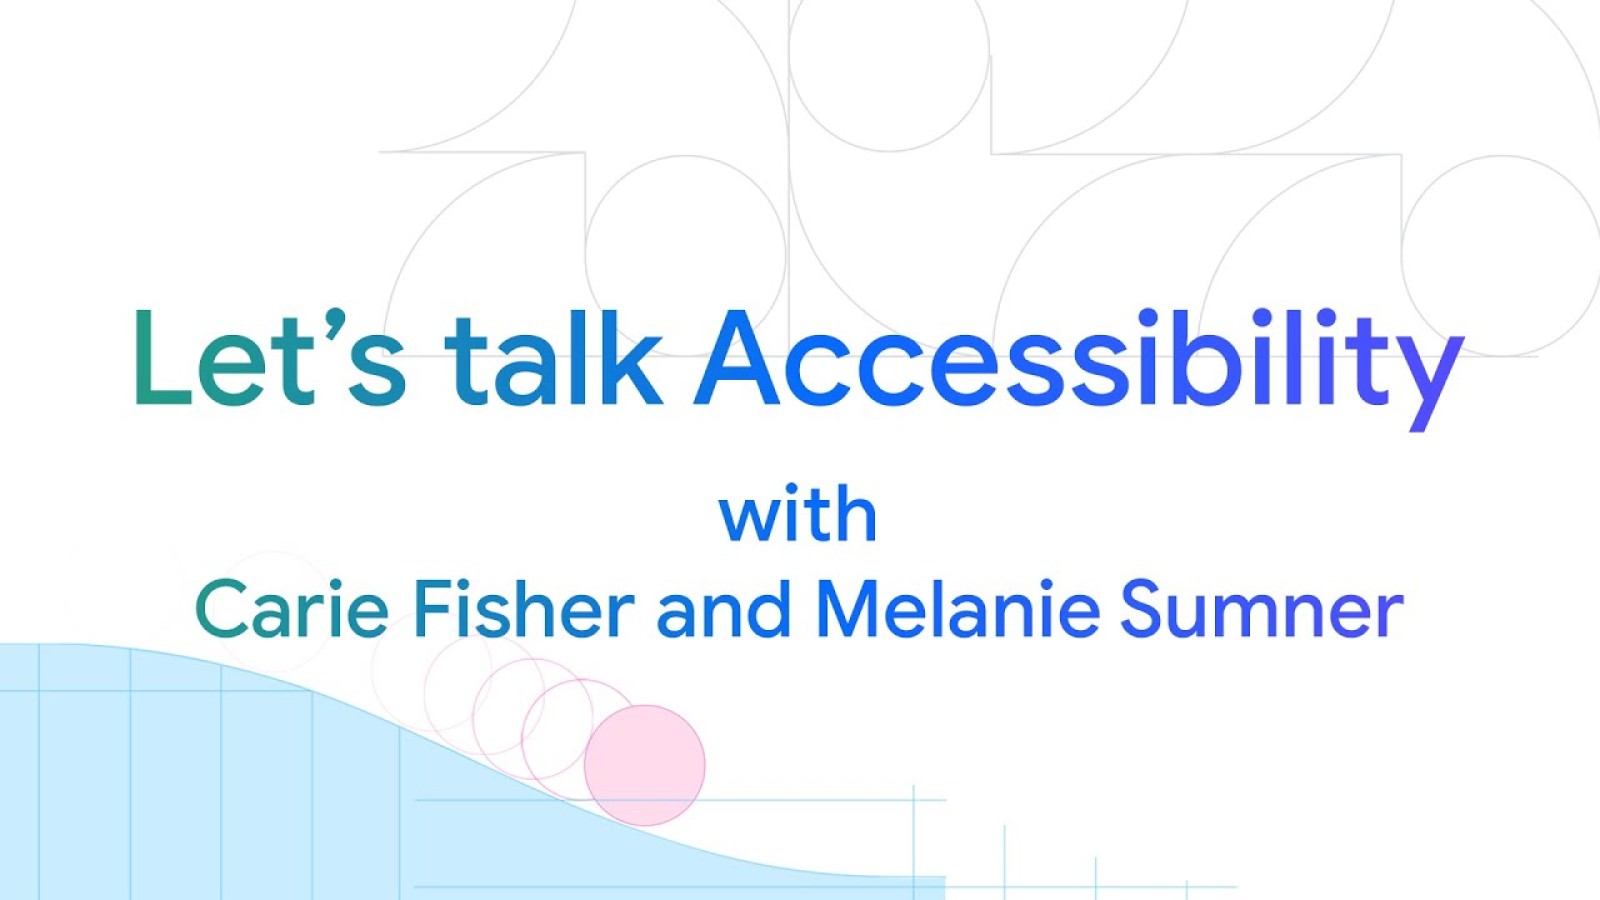 Let’s talk Accessibility